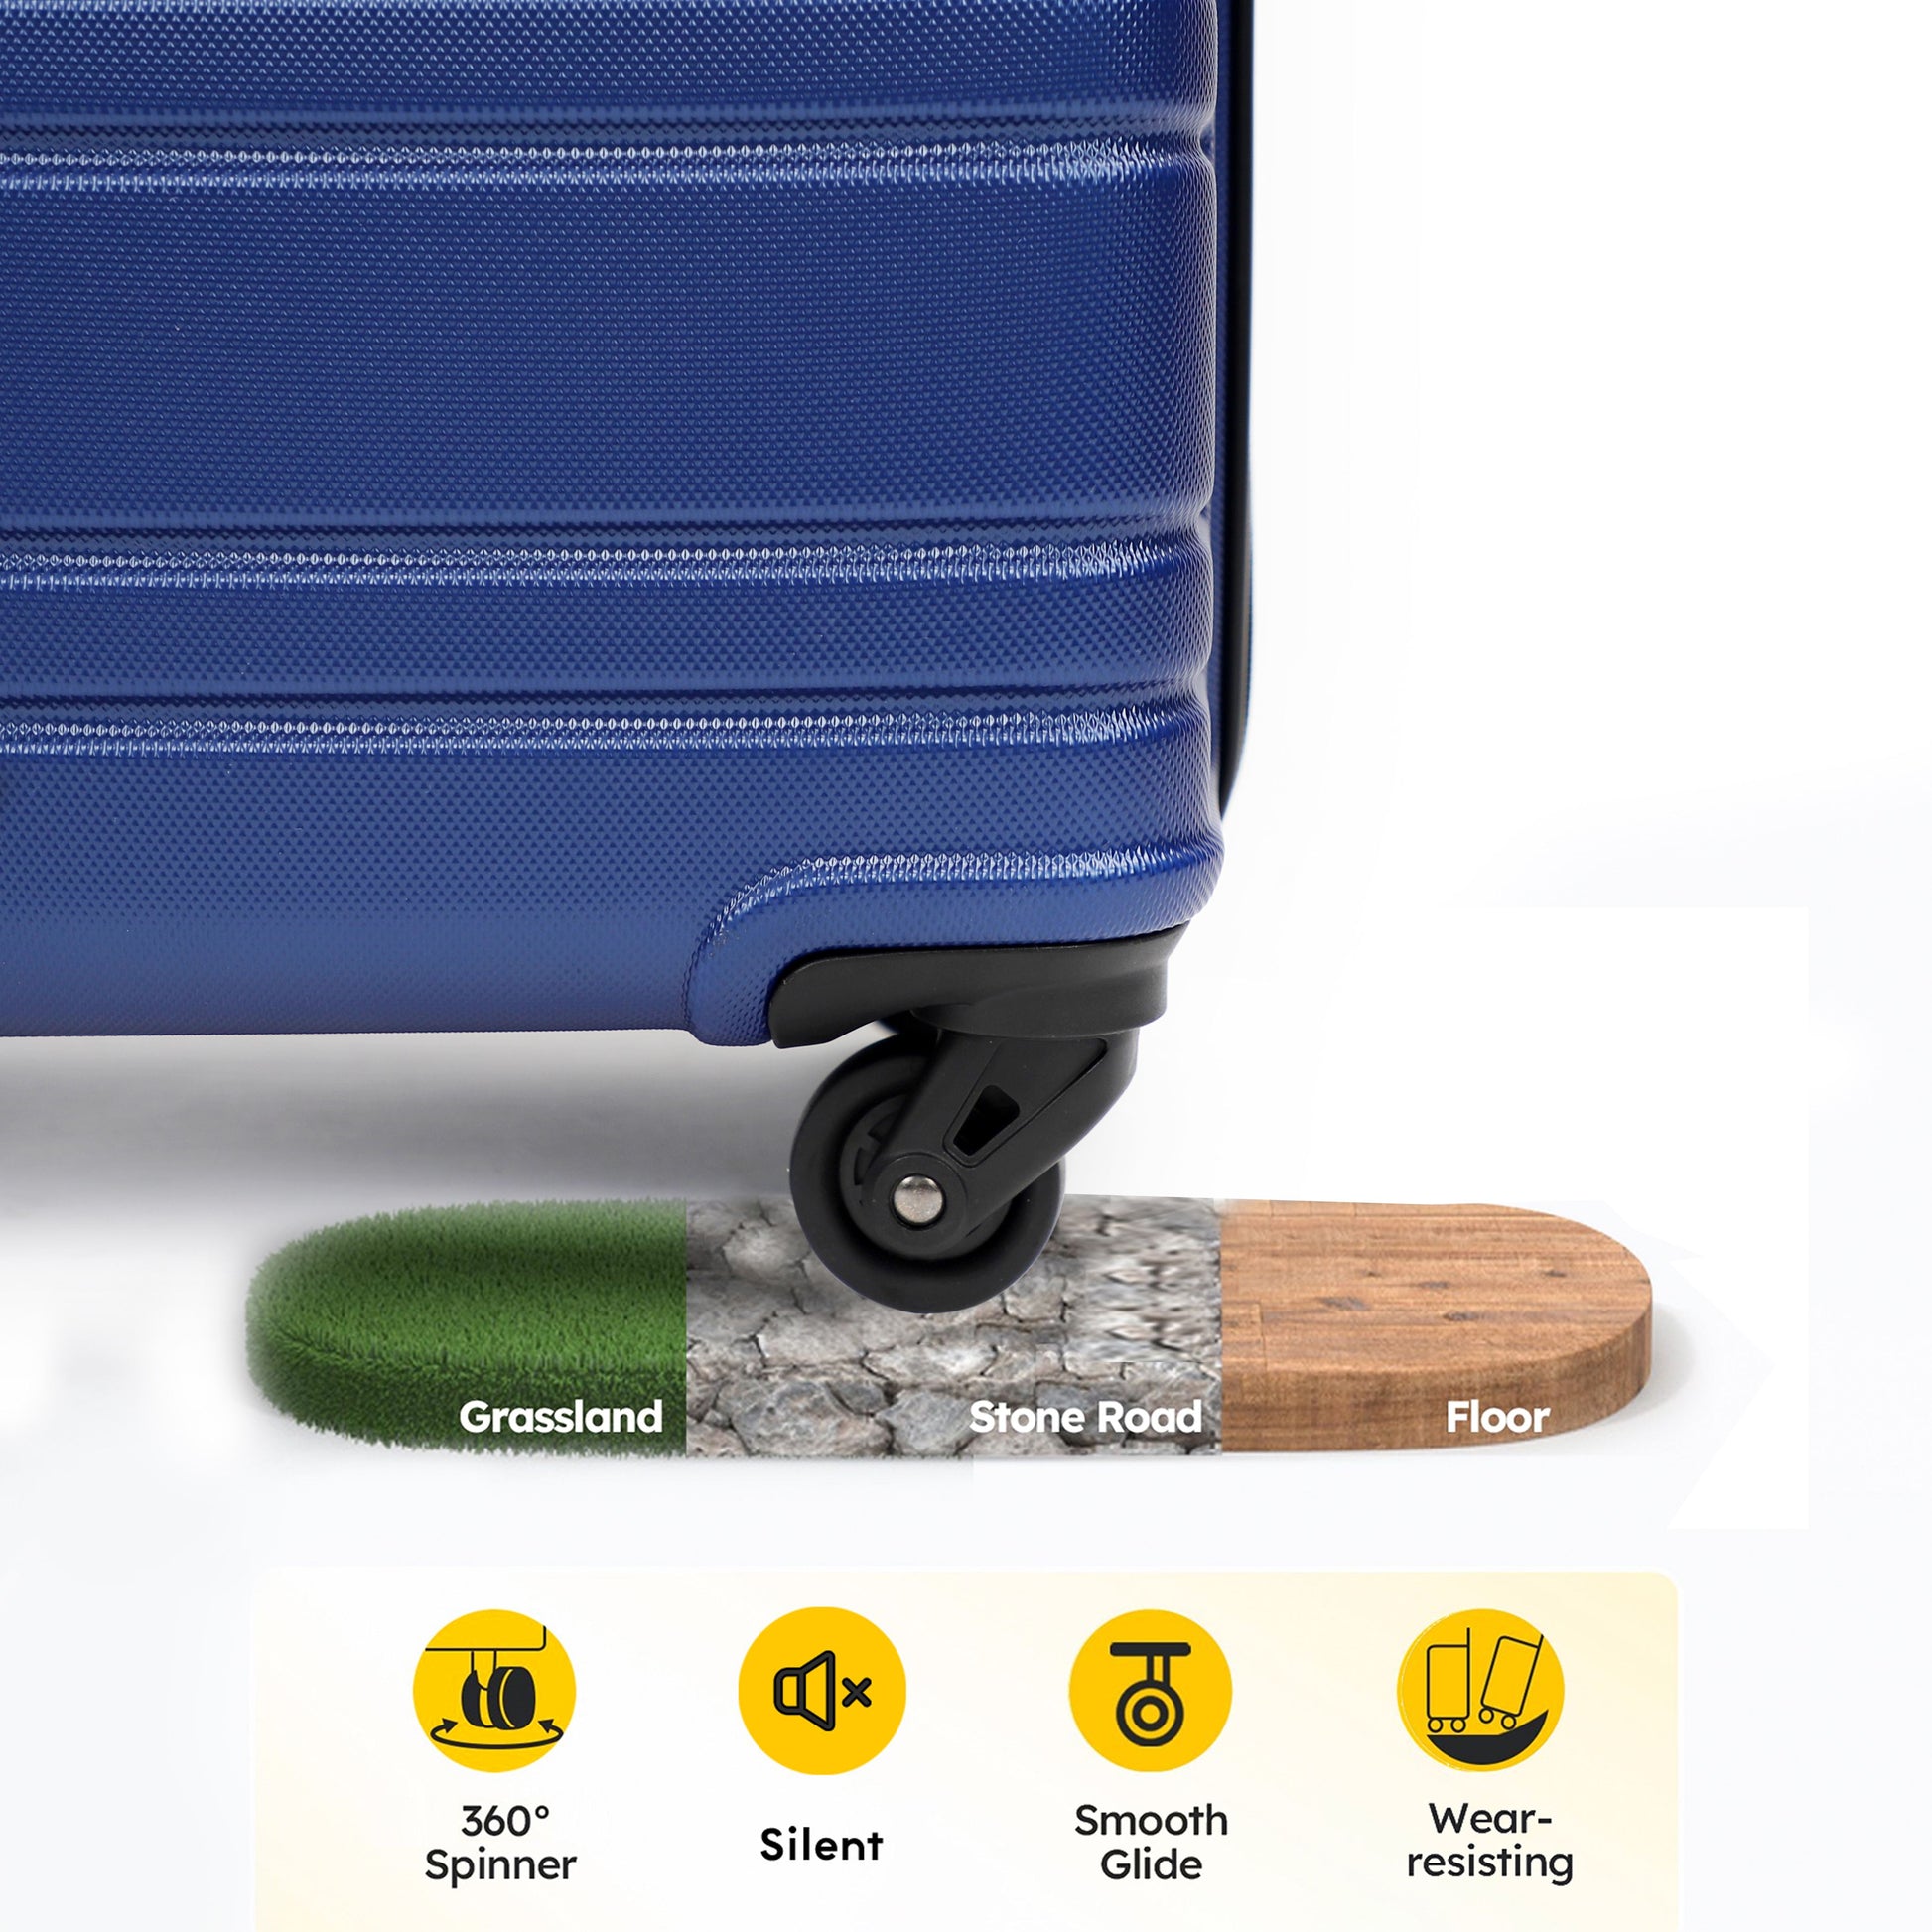 Airline_Luggage_Sets_3peice_Blue_wheel_N12721005